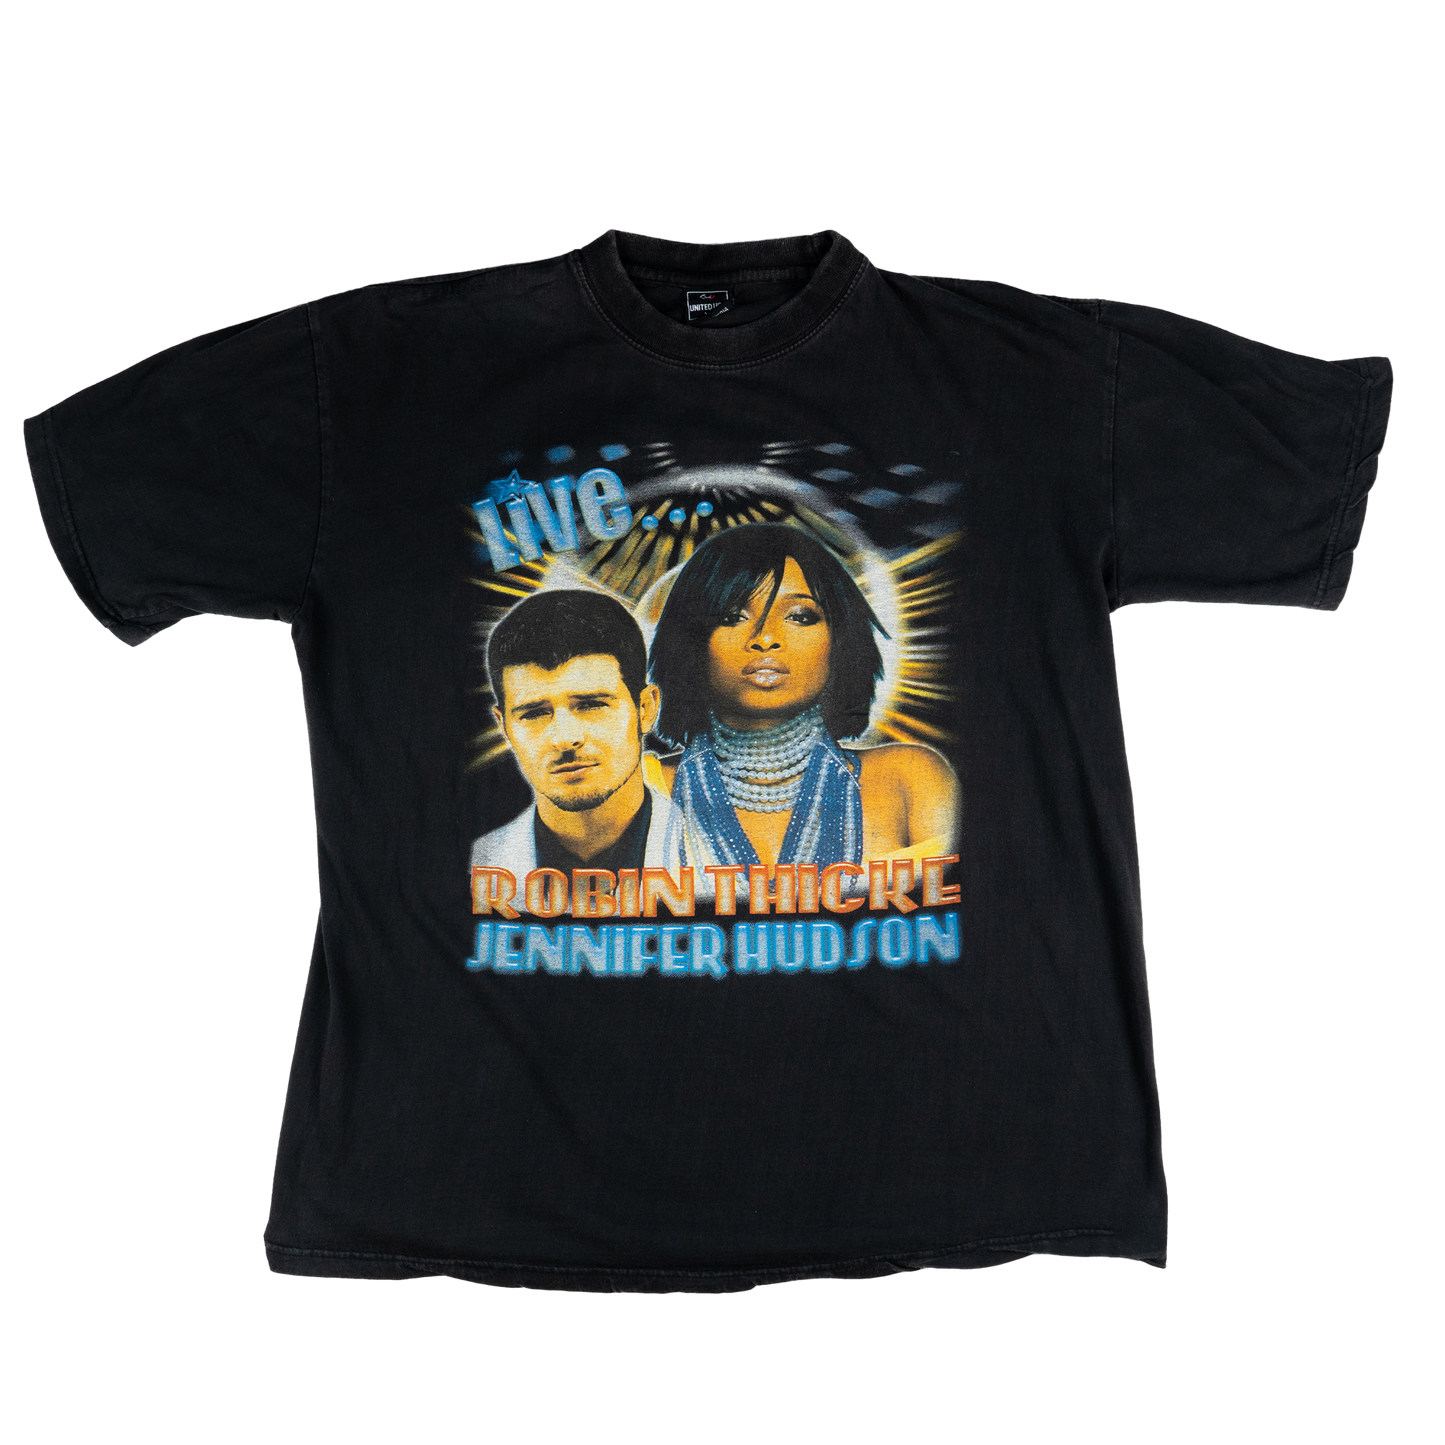 Robin Thicke & Jennifer Hudson Graphic Tee - Front